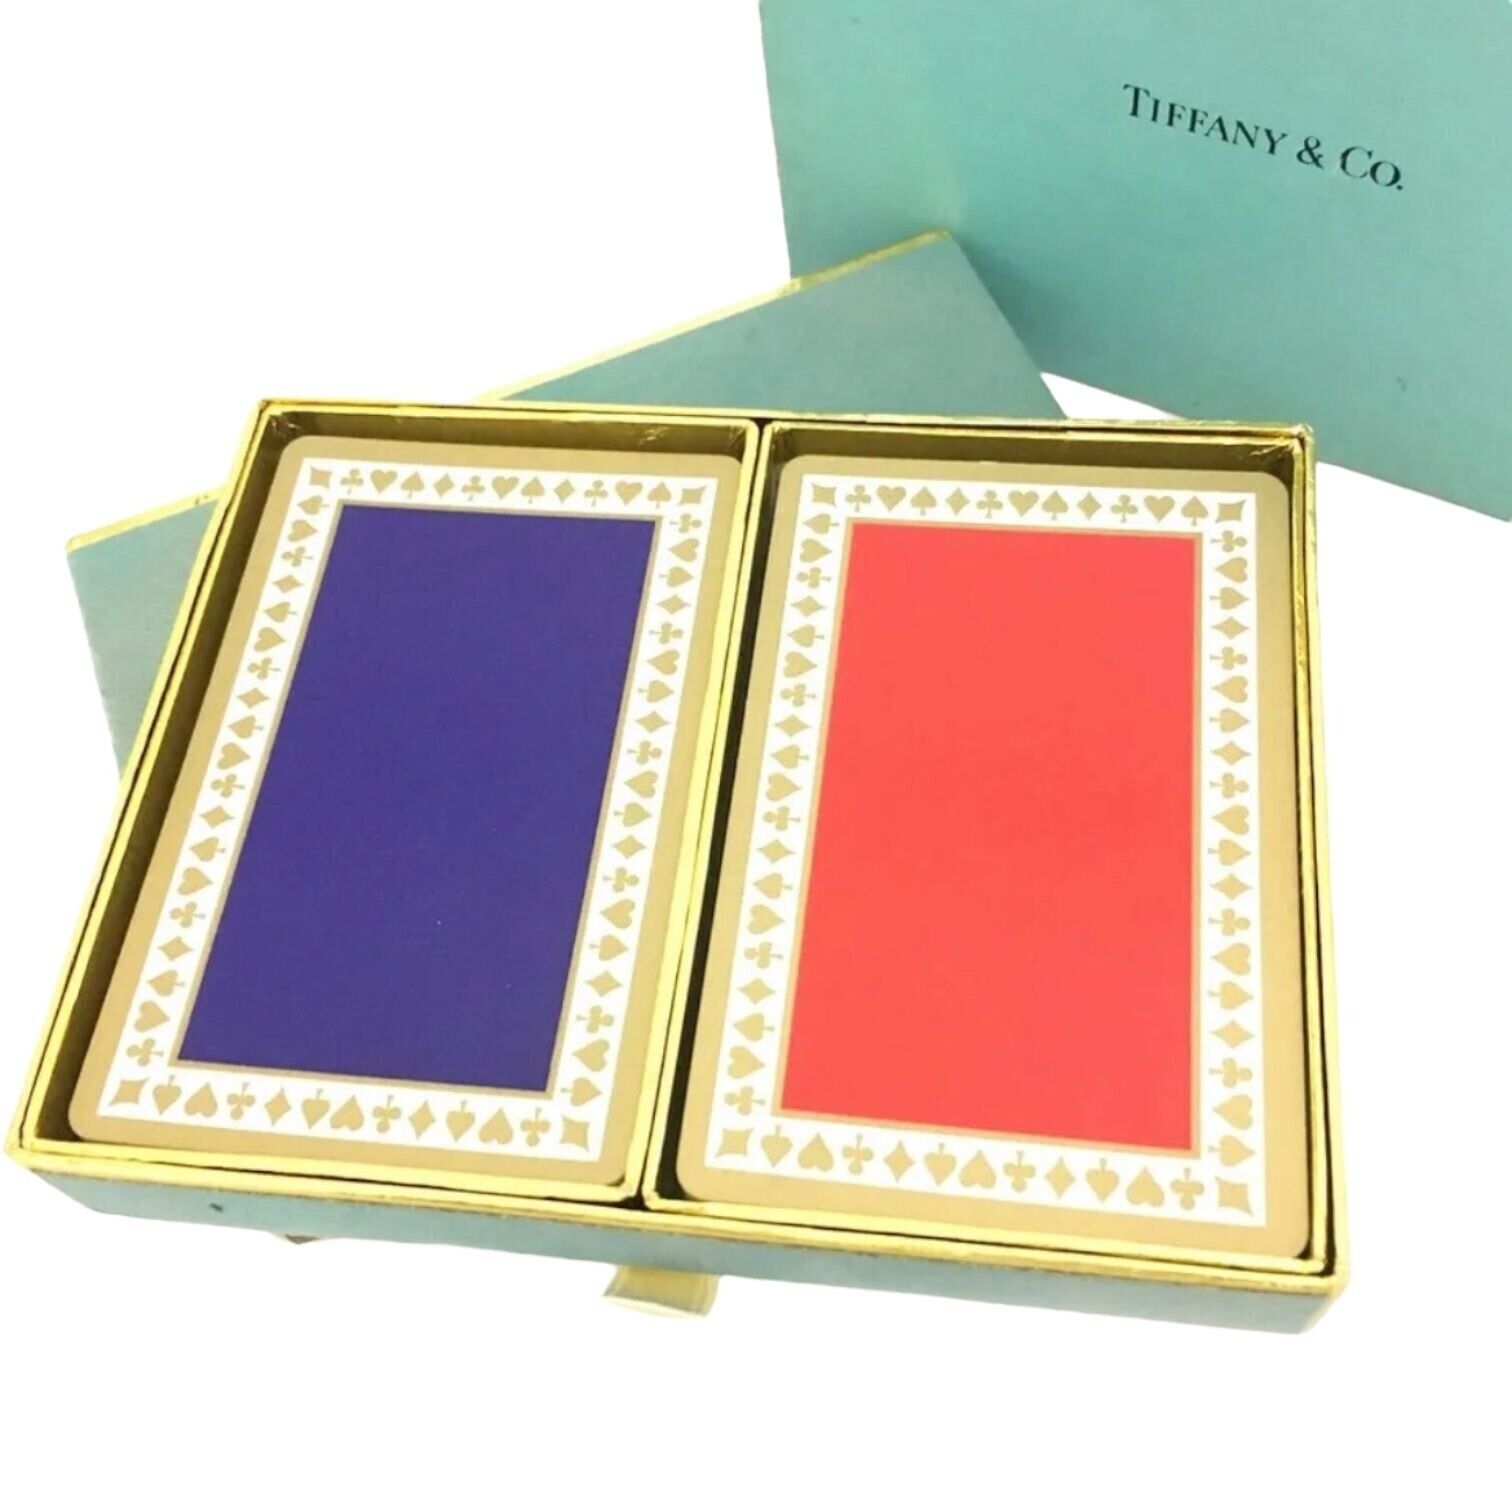 Tiffany & Co Vintage double set playing deck cards #1219